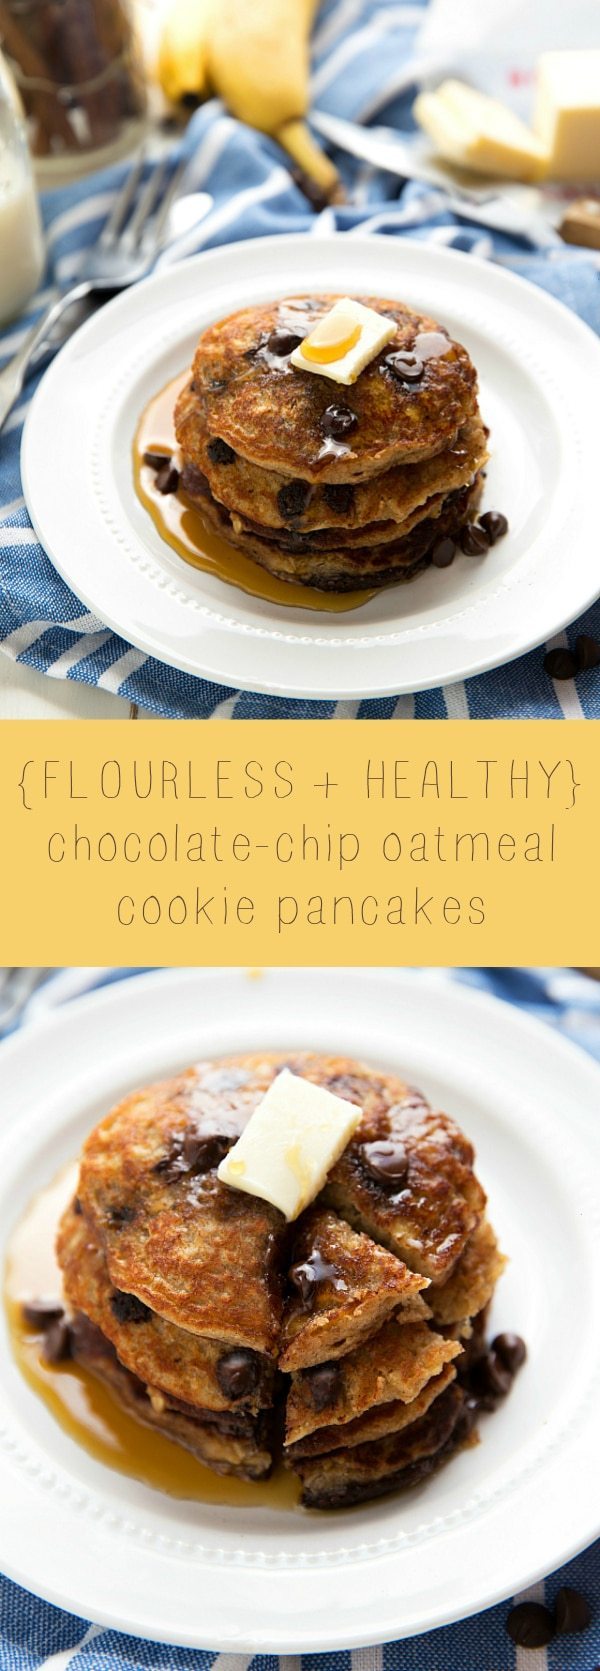 Made with Greek yogurt and a mashed banana PLUS oats, these healthy and flourless pancakes are good for you and great tasting!!